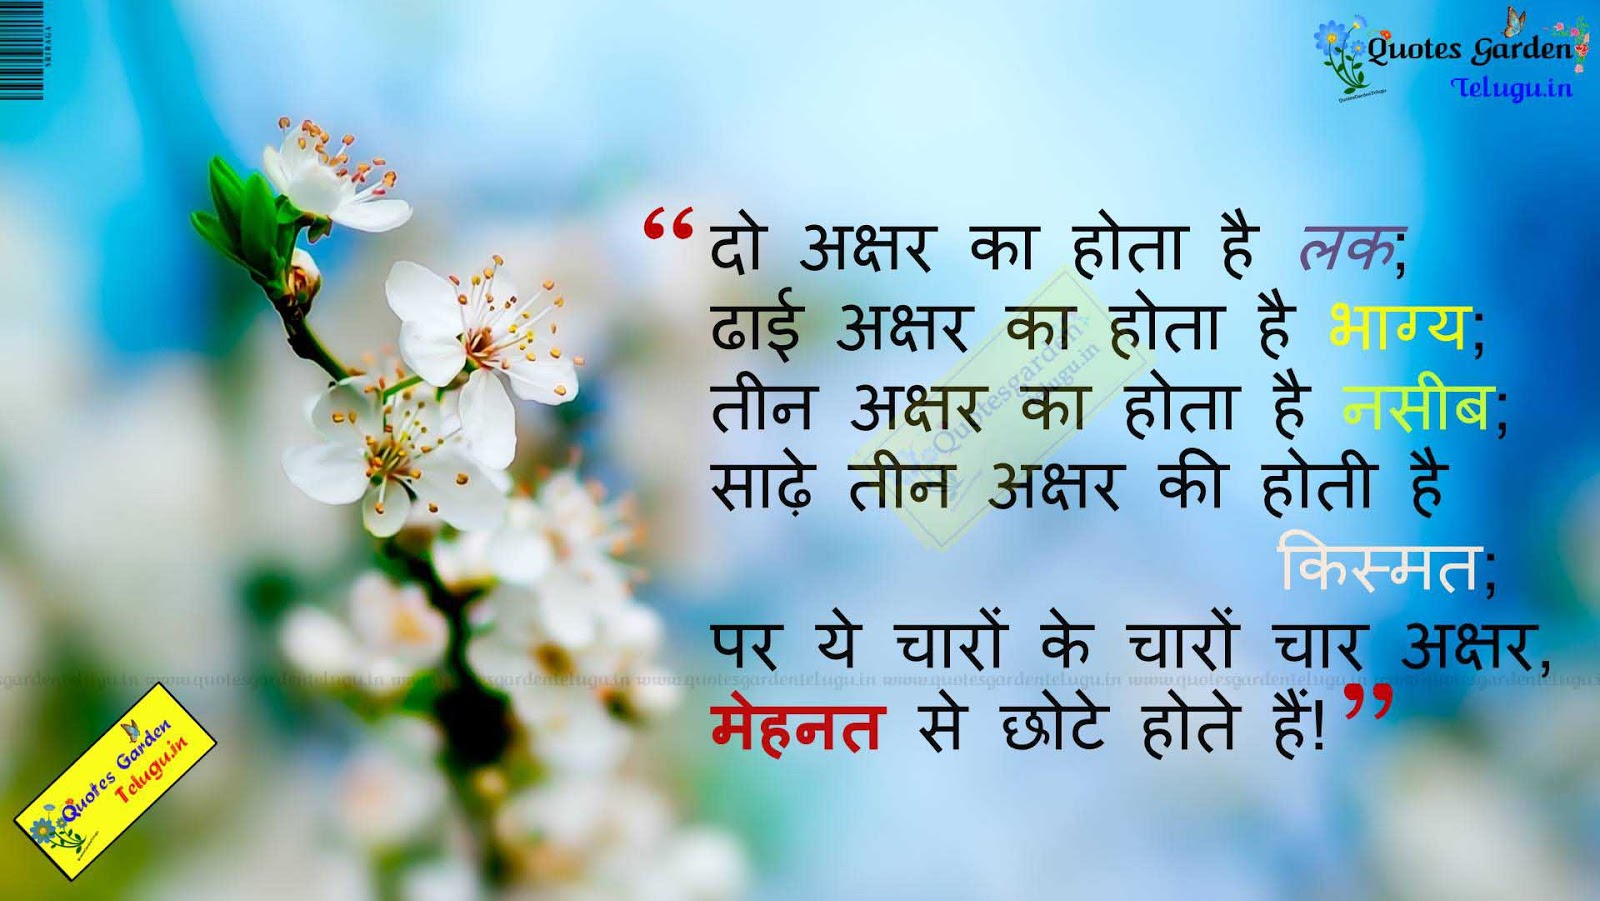 Best Hindi Inspirational Quotes anmol vachan suvichar 792 | QUOTES